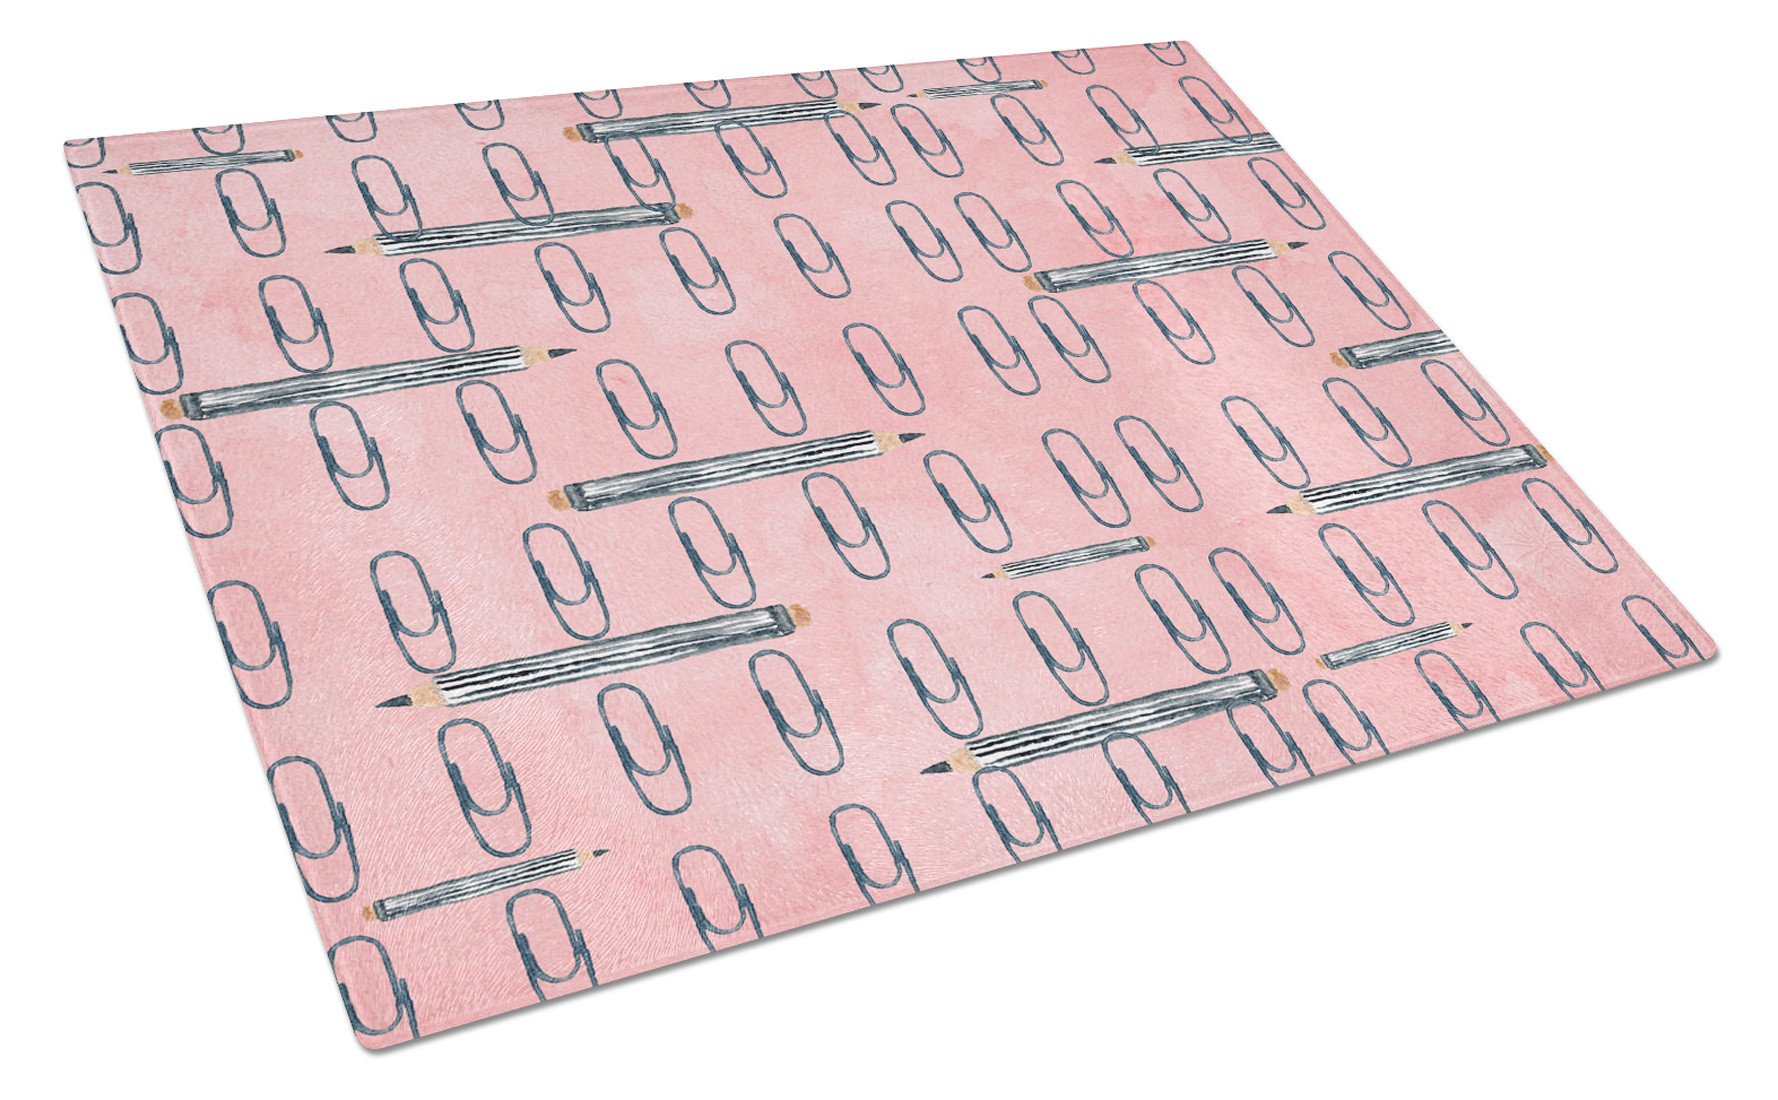 Watercolor Organized Paper Clips Pink Glass Cutting Board Large BB7539LCB by Caroline's Treasures